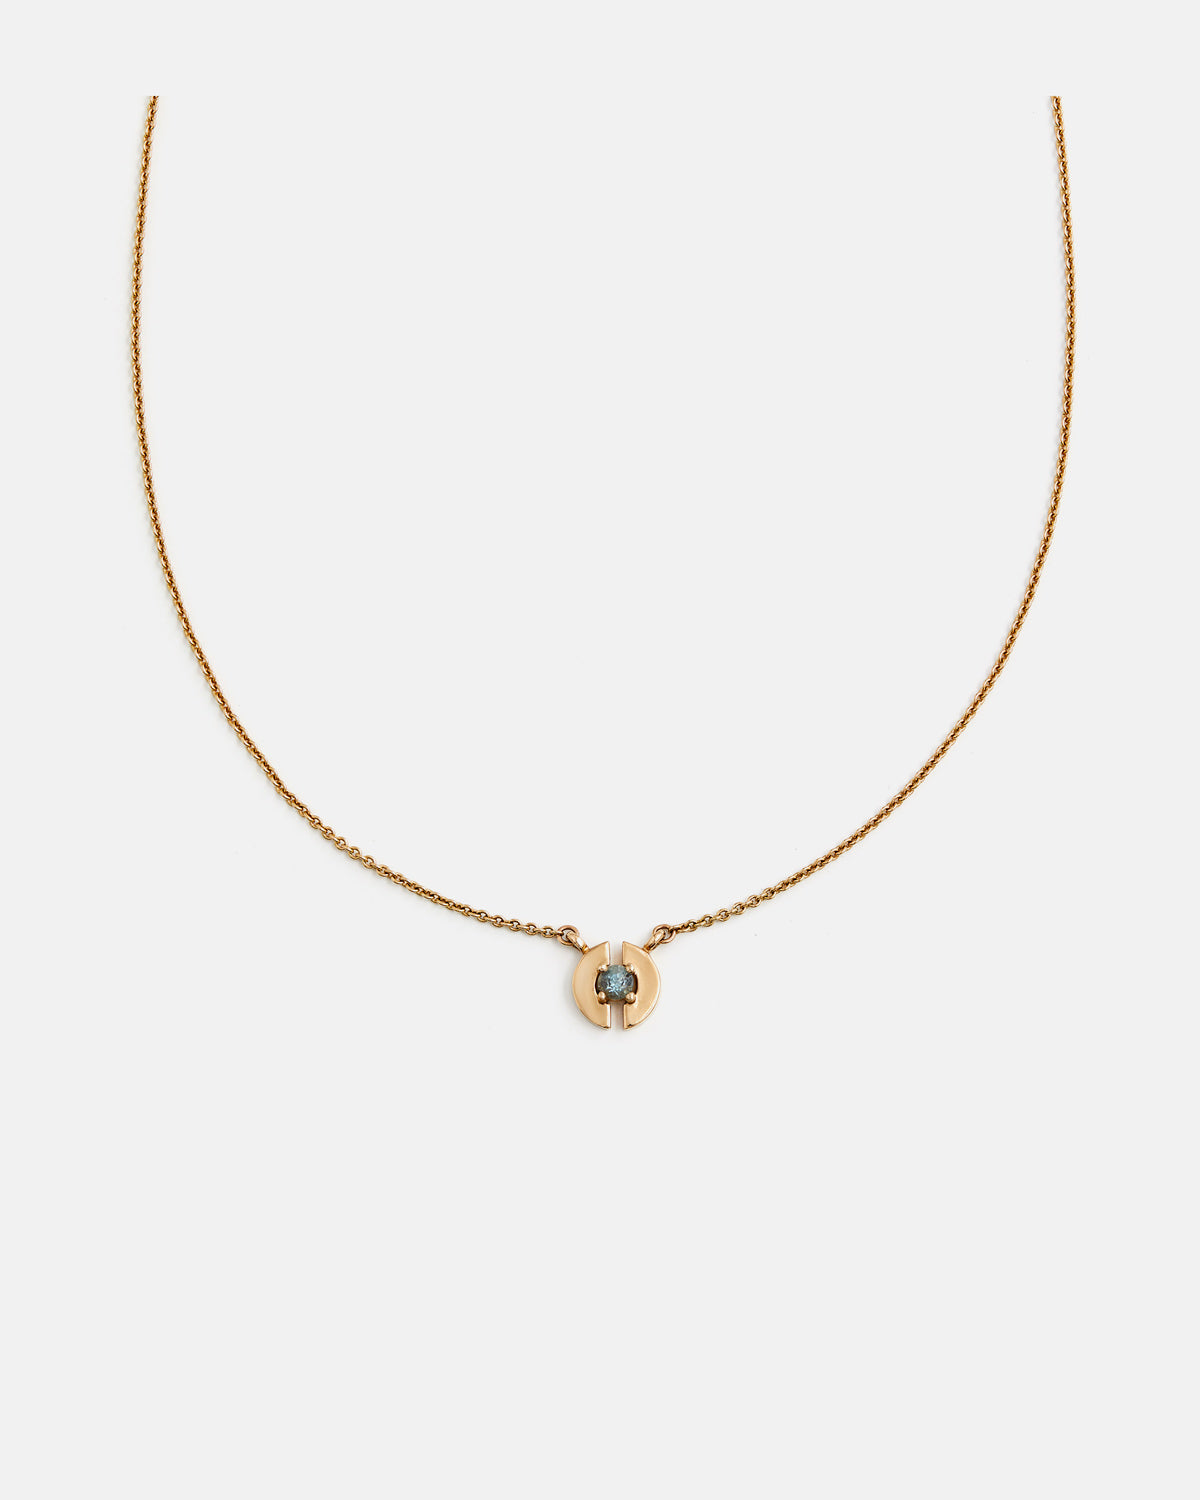 Stein Necklace in Yellow Gold with Aquamarine